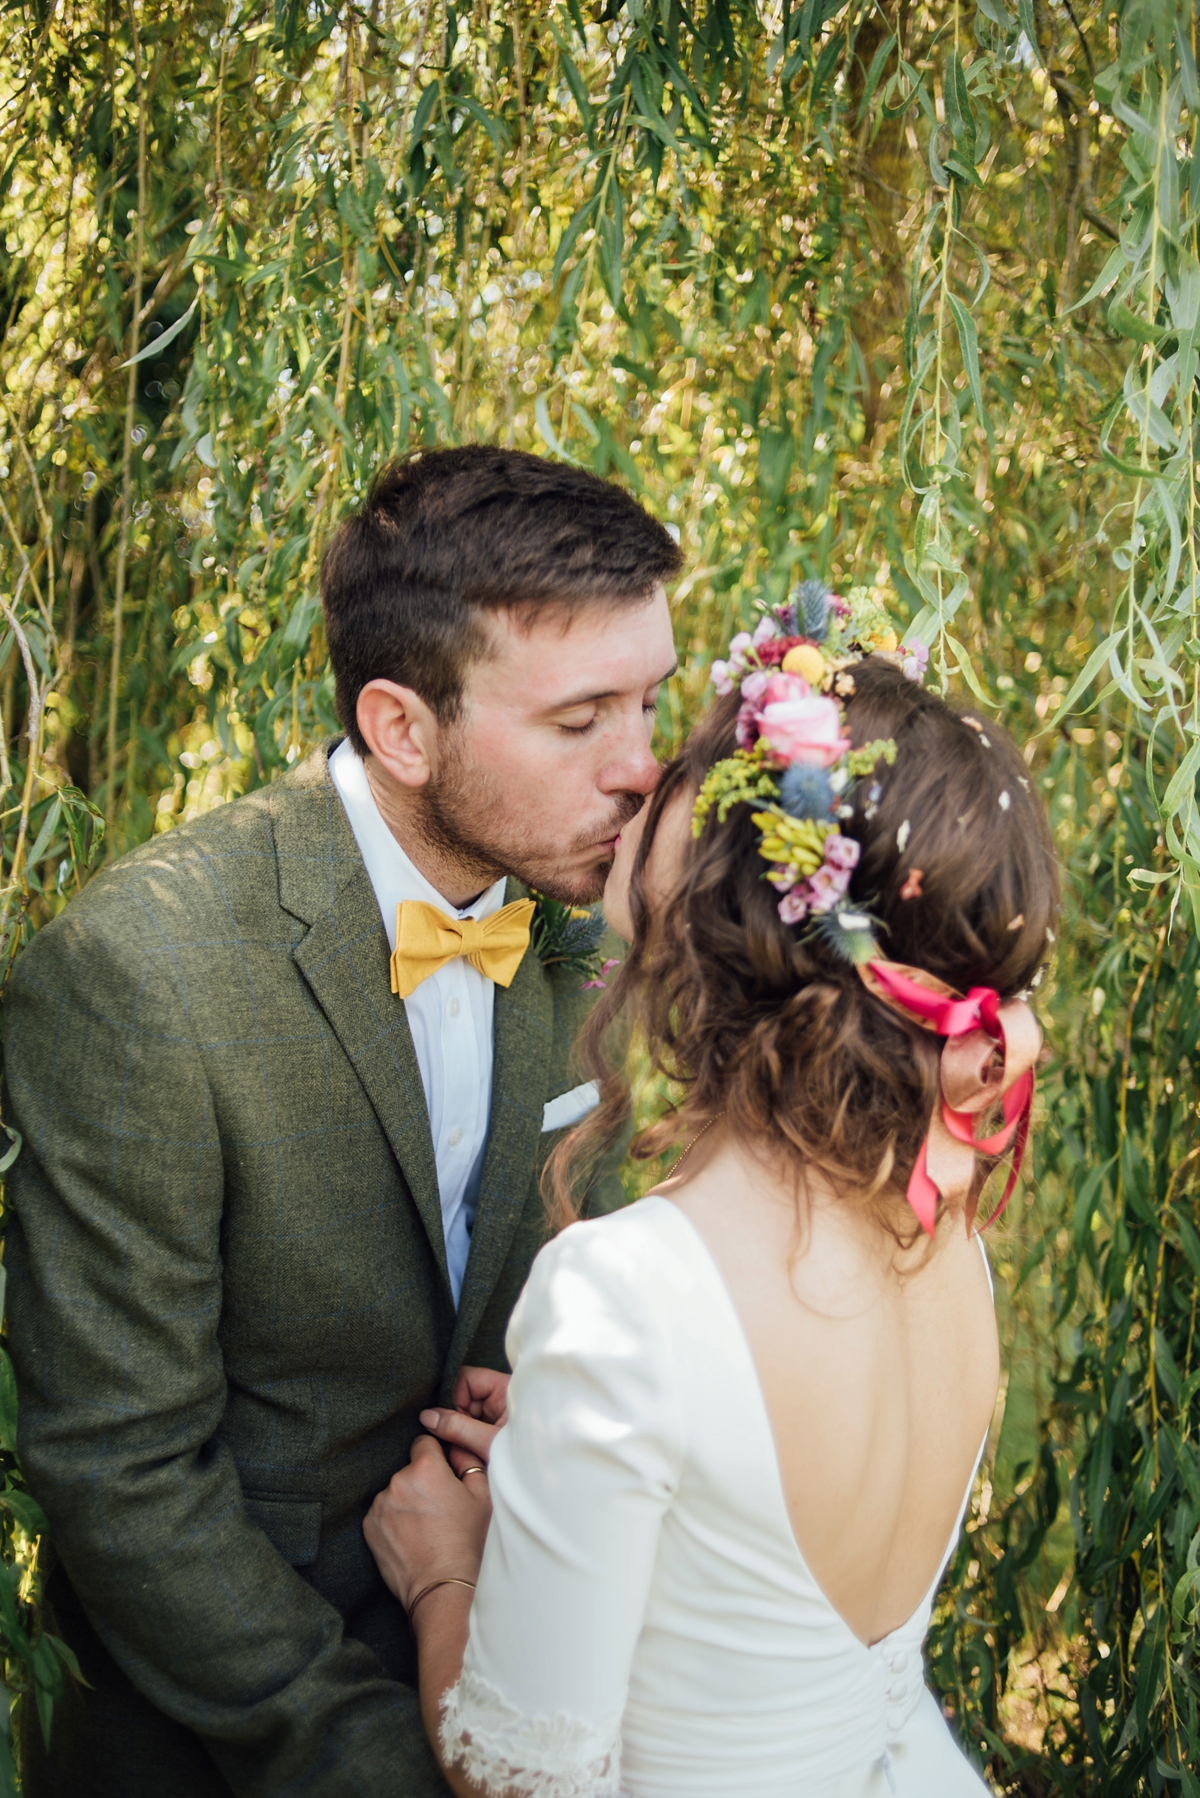 33 A handmade and natural outdoor wedding in Devon